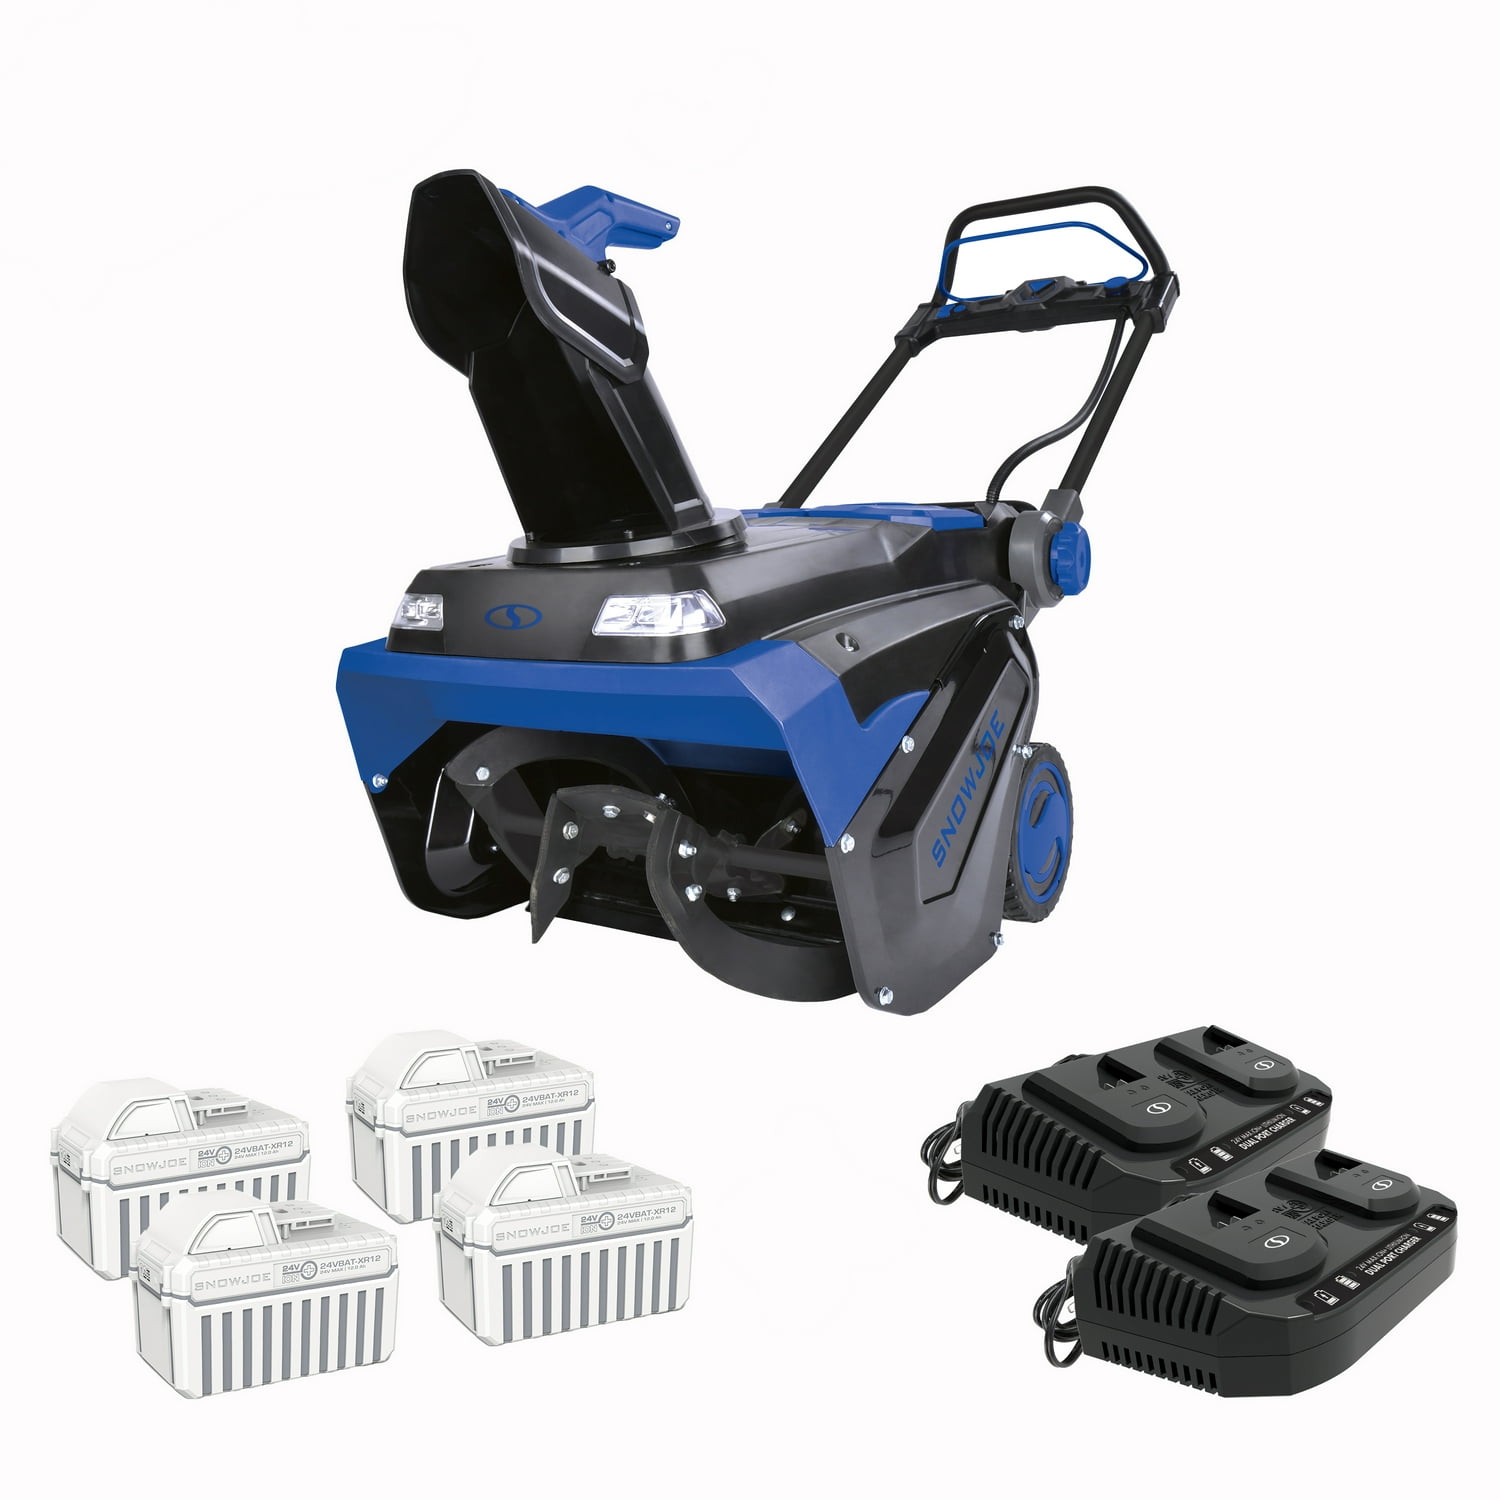 Snow Joe: 96V 21-inch Brushless Single-Stage Cordless Snow Blower w/ 4 x 12.0-Ah Batteries & 2 Chargers $397 + Free Shipping